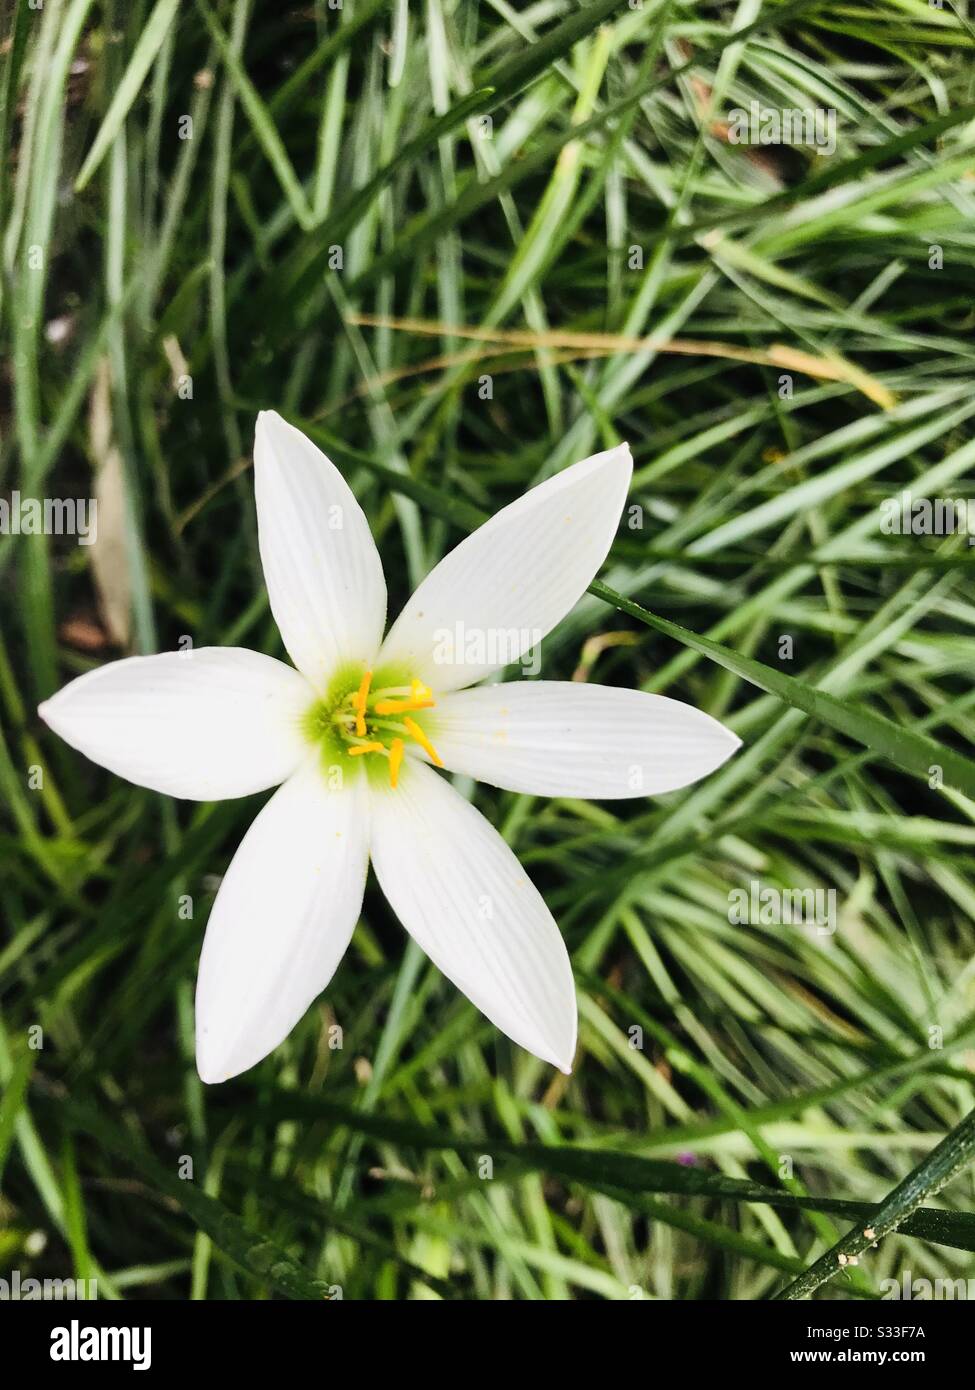 After lunch came out from restaurant & sat beside garden area found garden beds- india , beside a small cute white lily flower - Zephyranthes  Candida aka Fairy lily, Westwood flower, white  flower Stock Photo